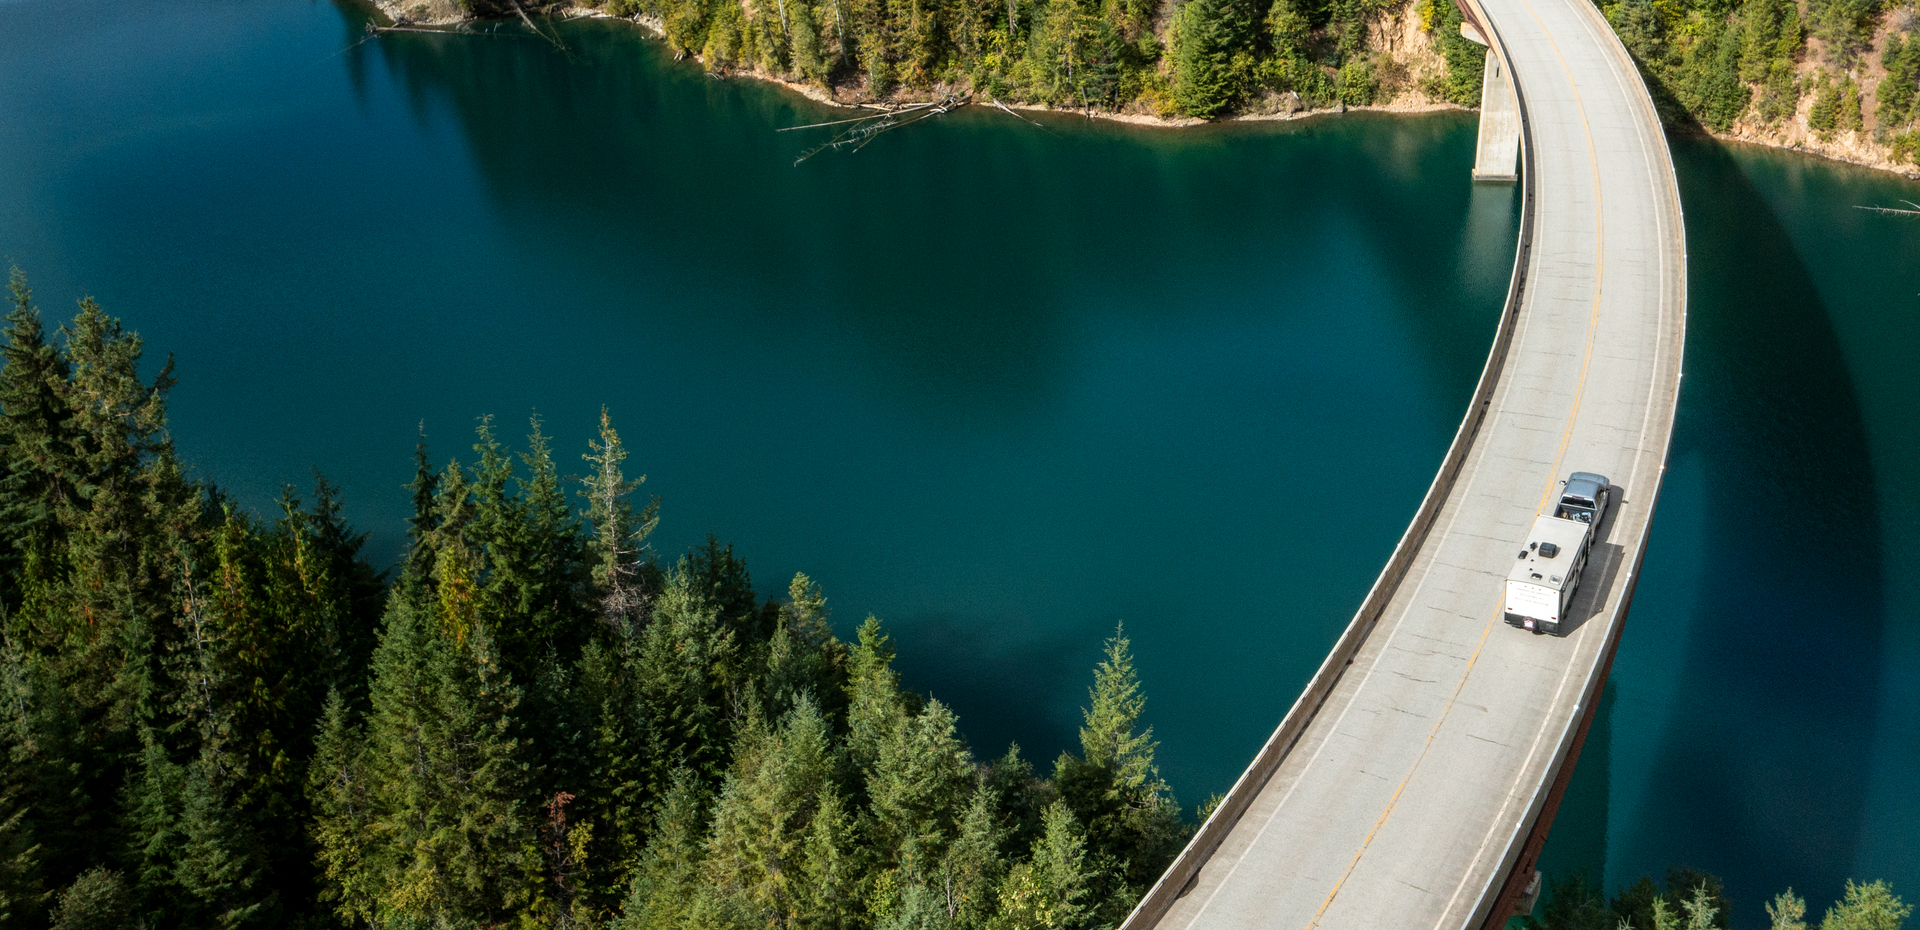 Aerial view of an RV crossing a bridge over a lake.